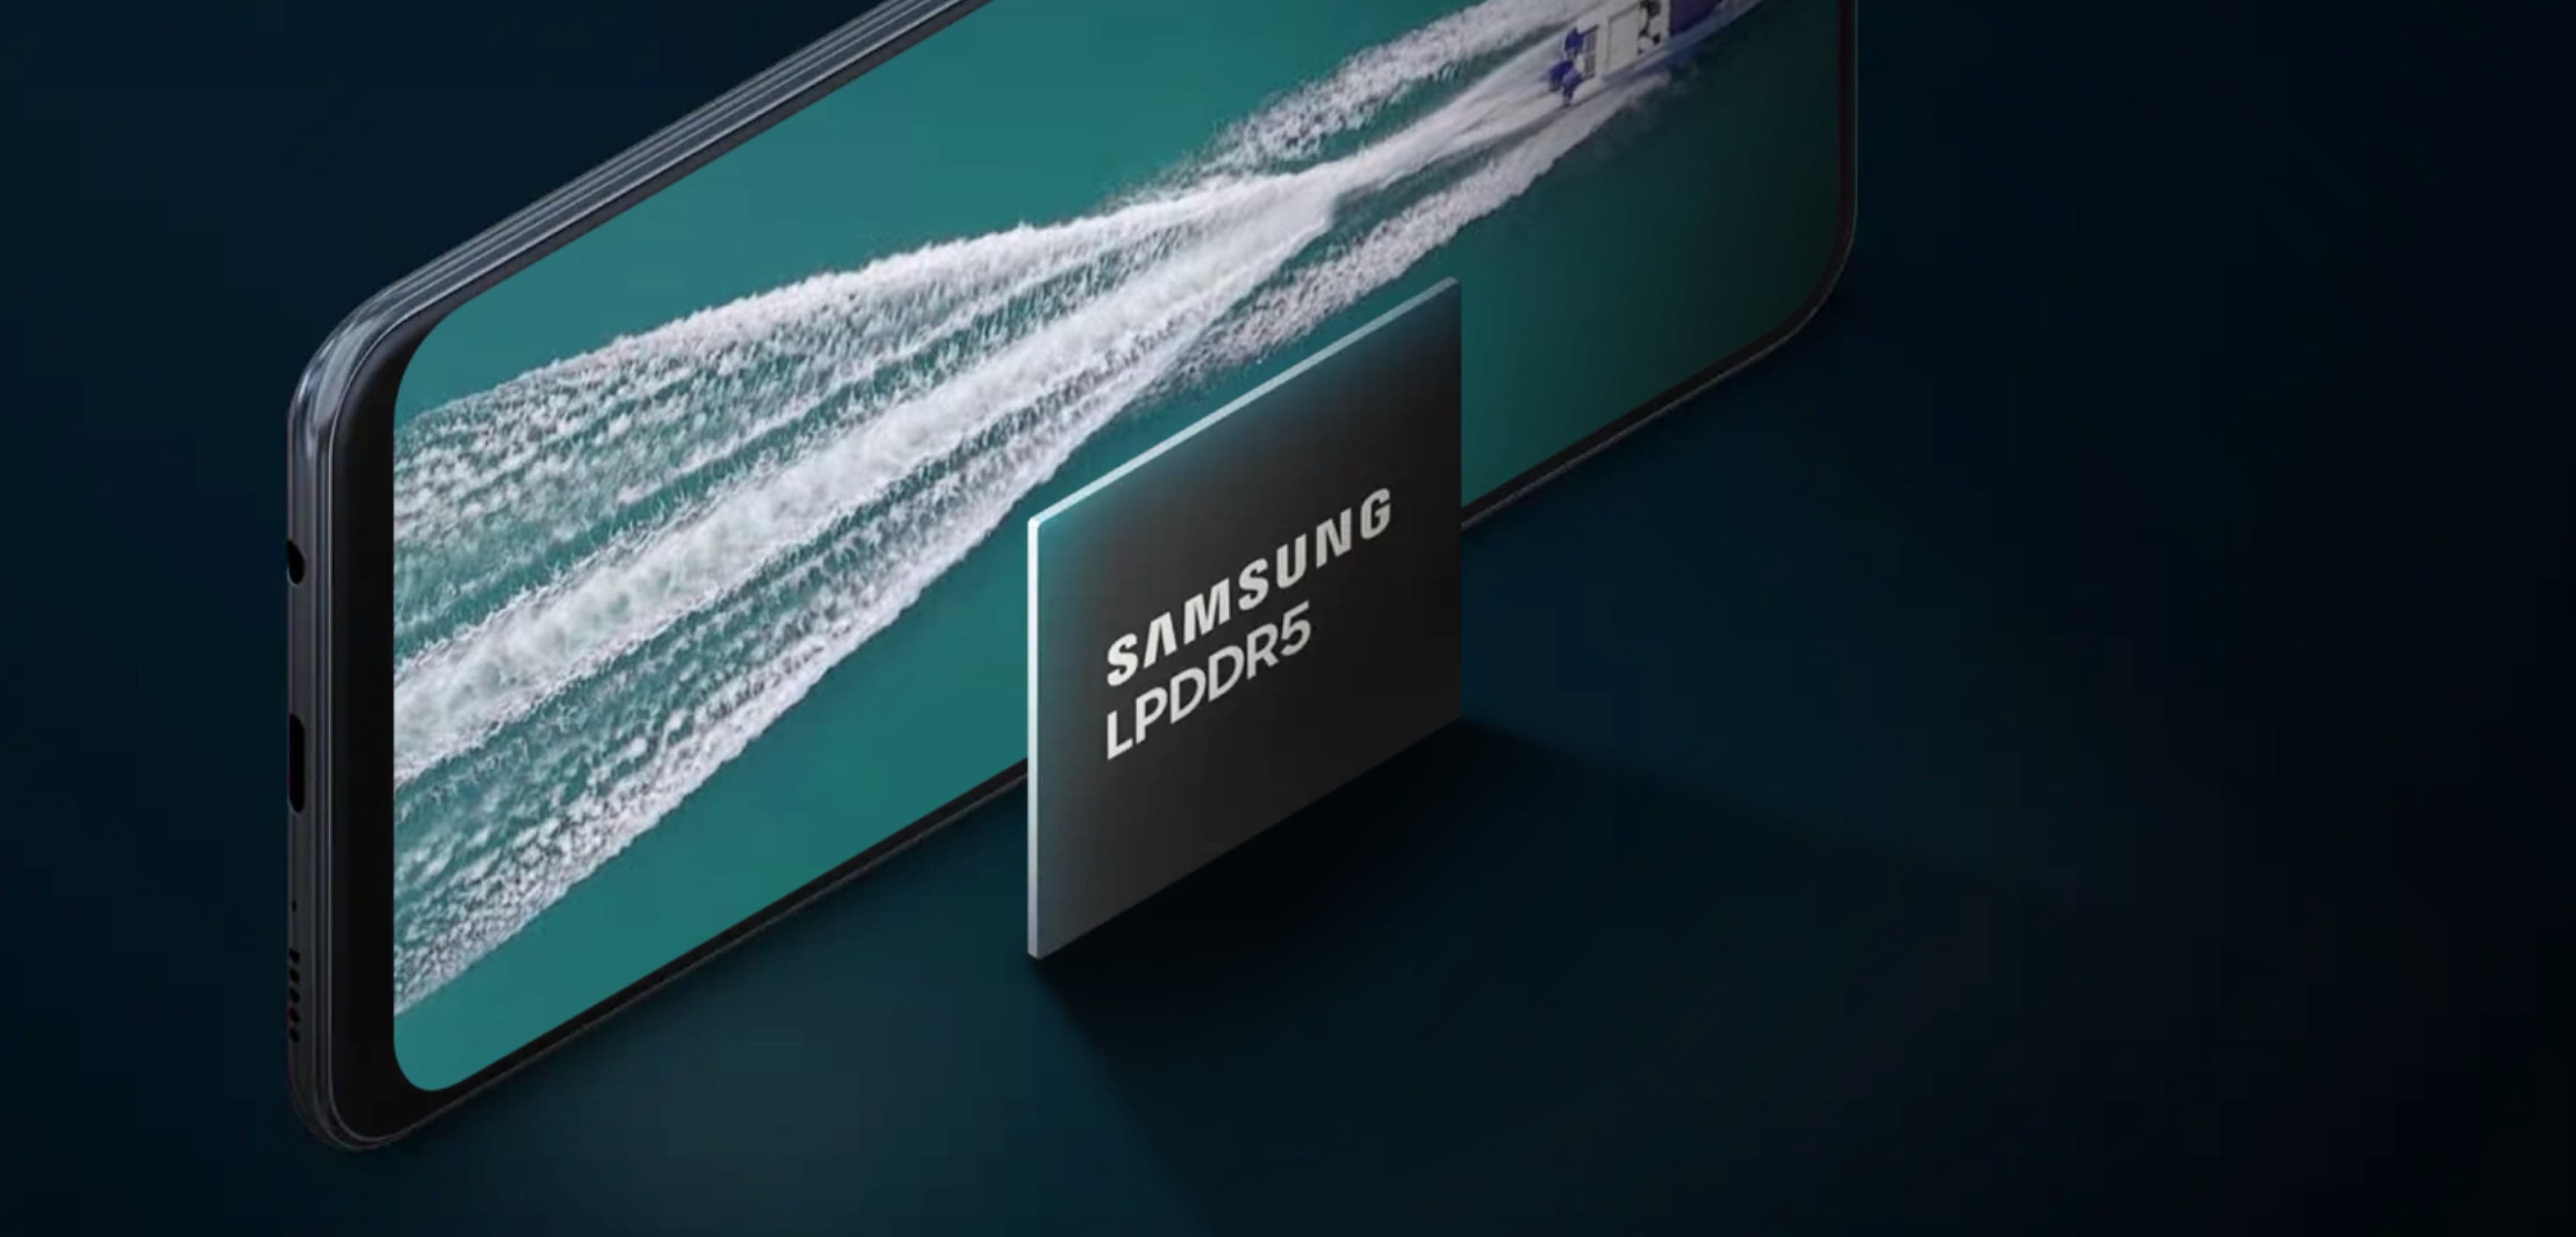 Samsung's LPDDR5 boasts transfer rates of up to 51.2GB per second, equivalent to approximately 14 full HD video files, with speeds reaching up to 6,400MB/s.